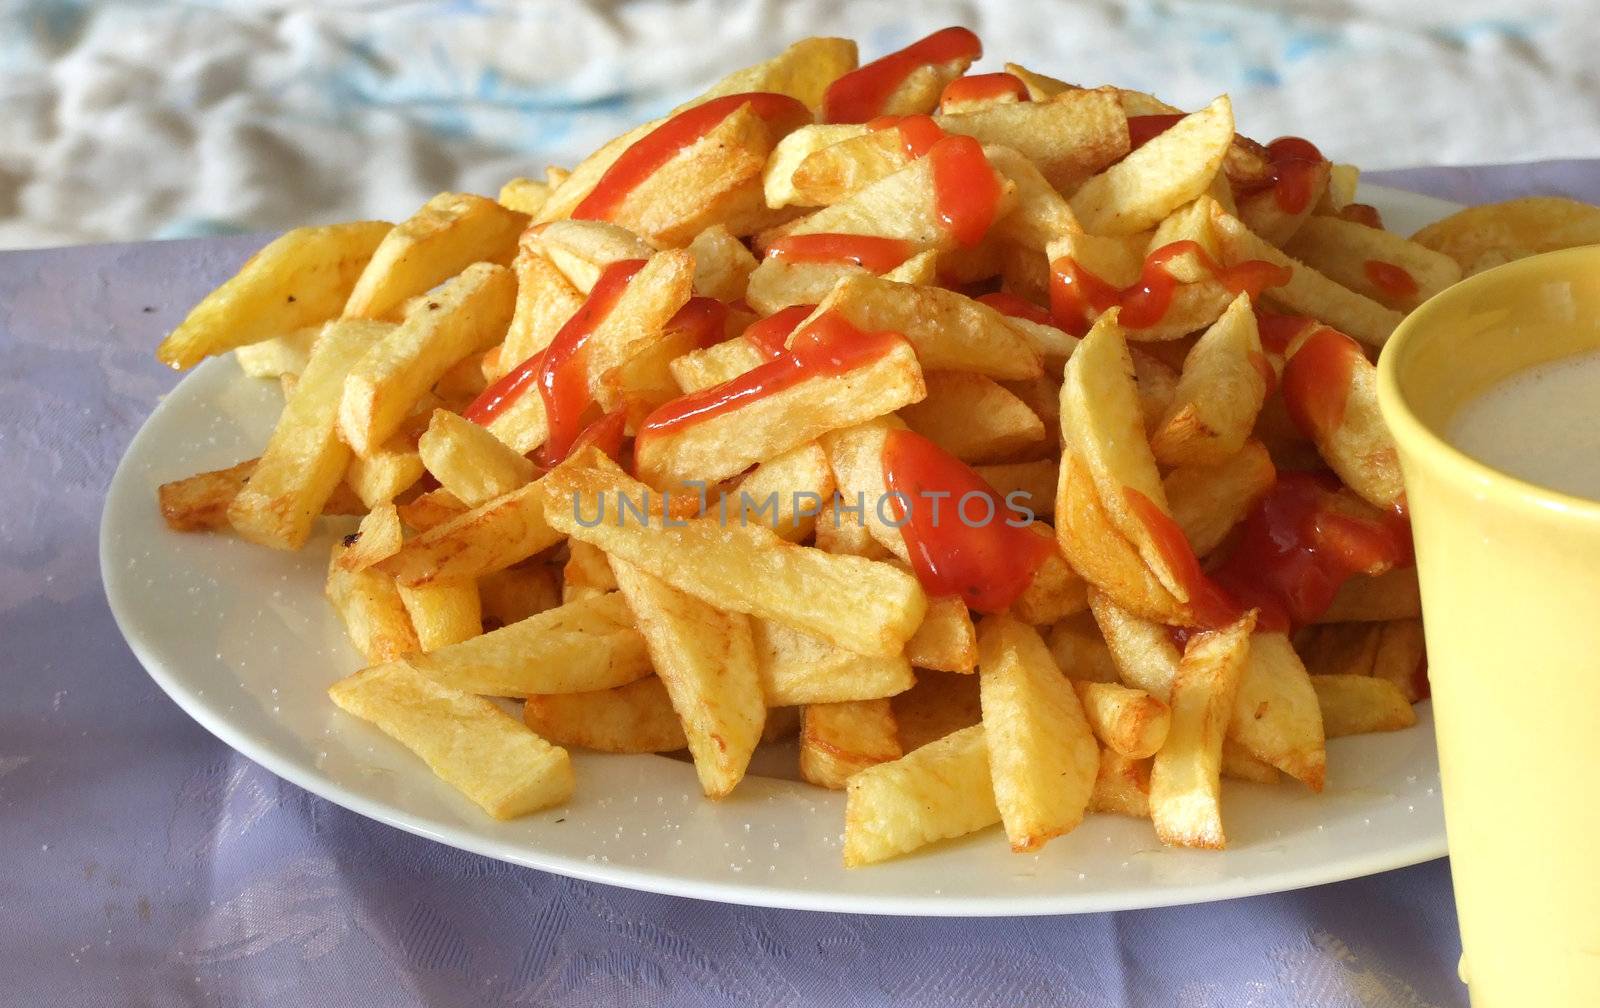 franch frites on a plate